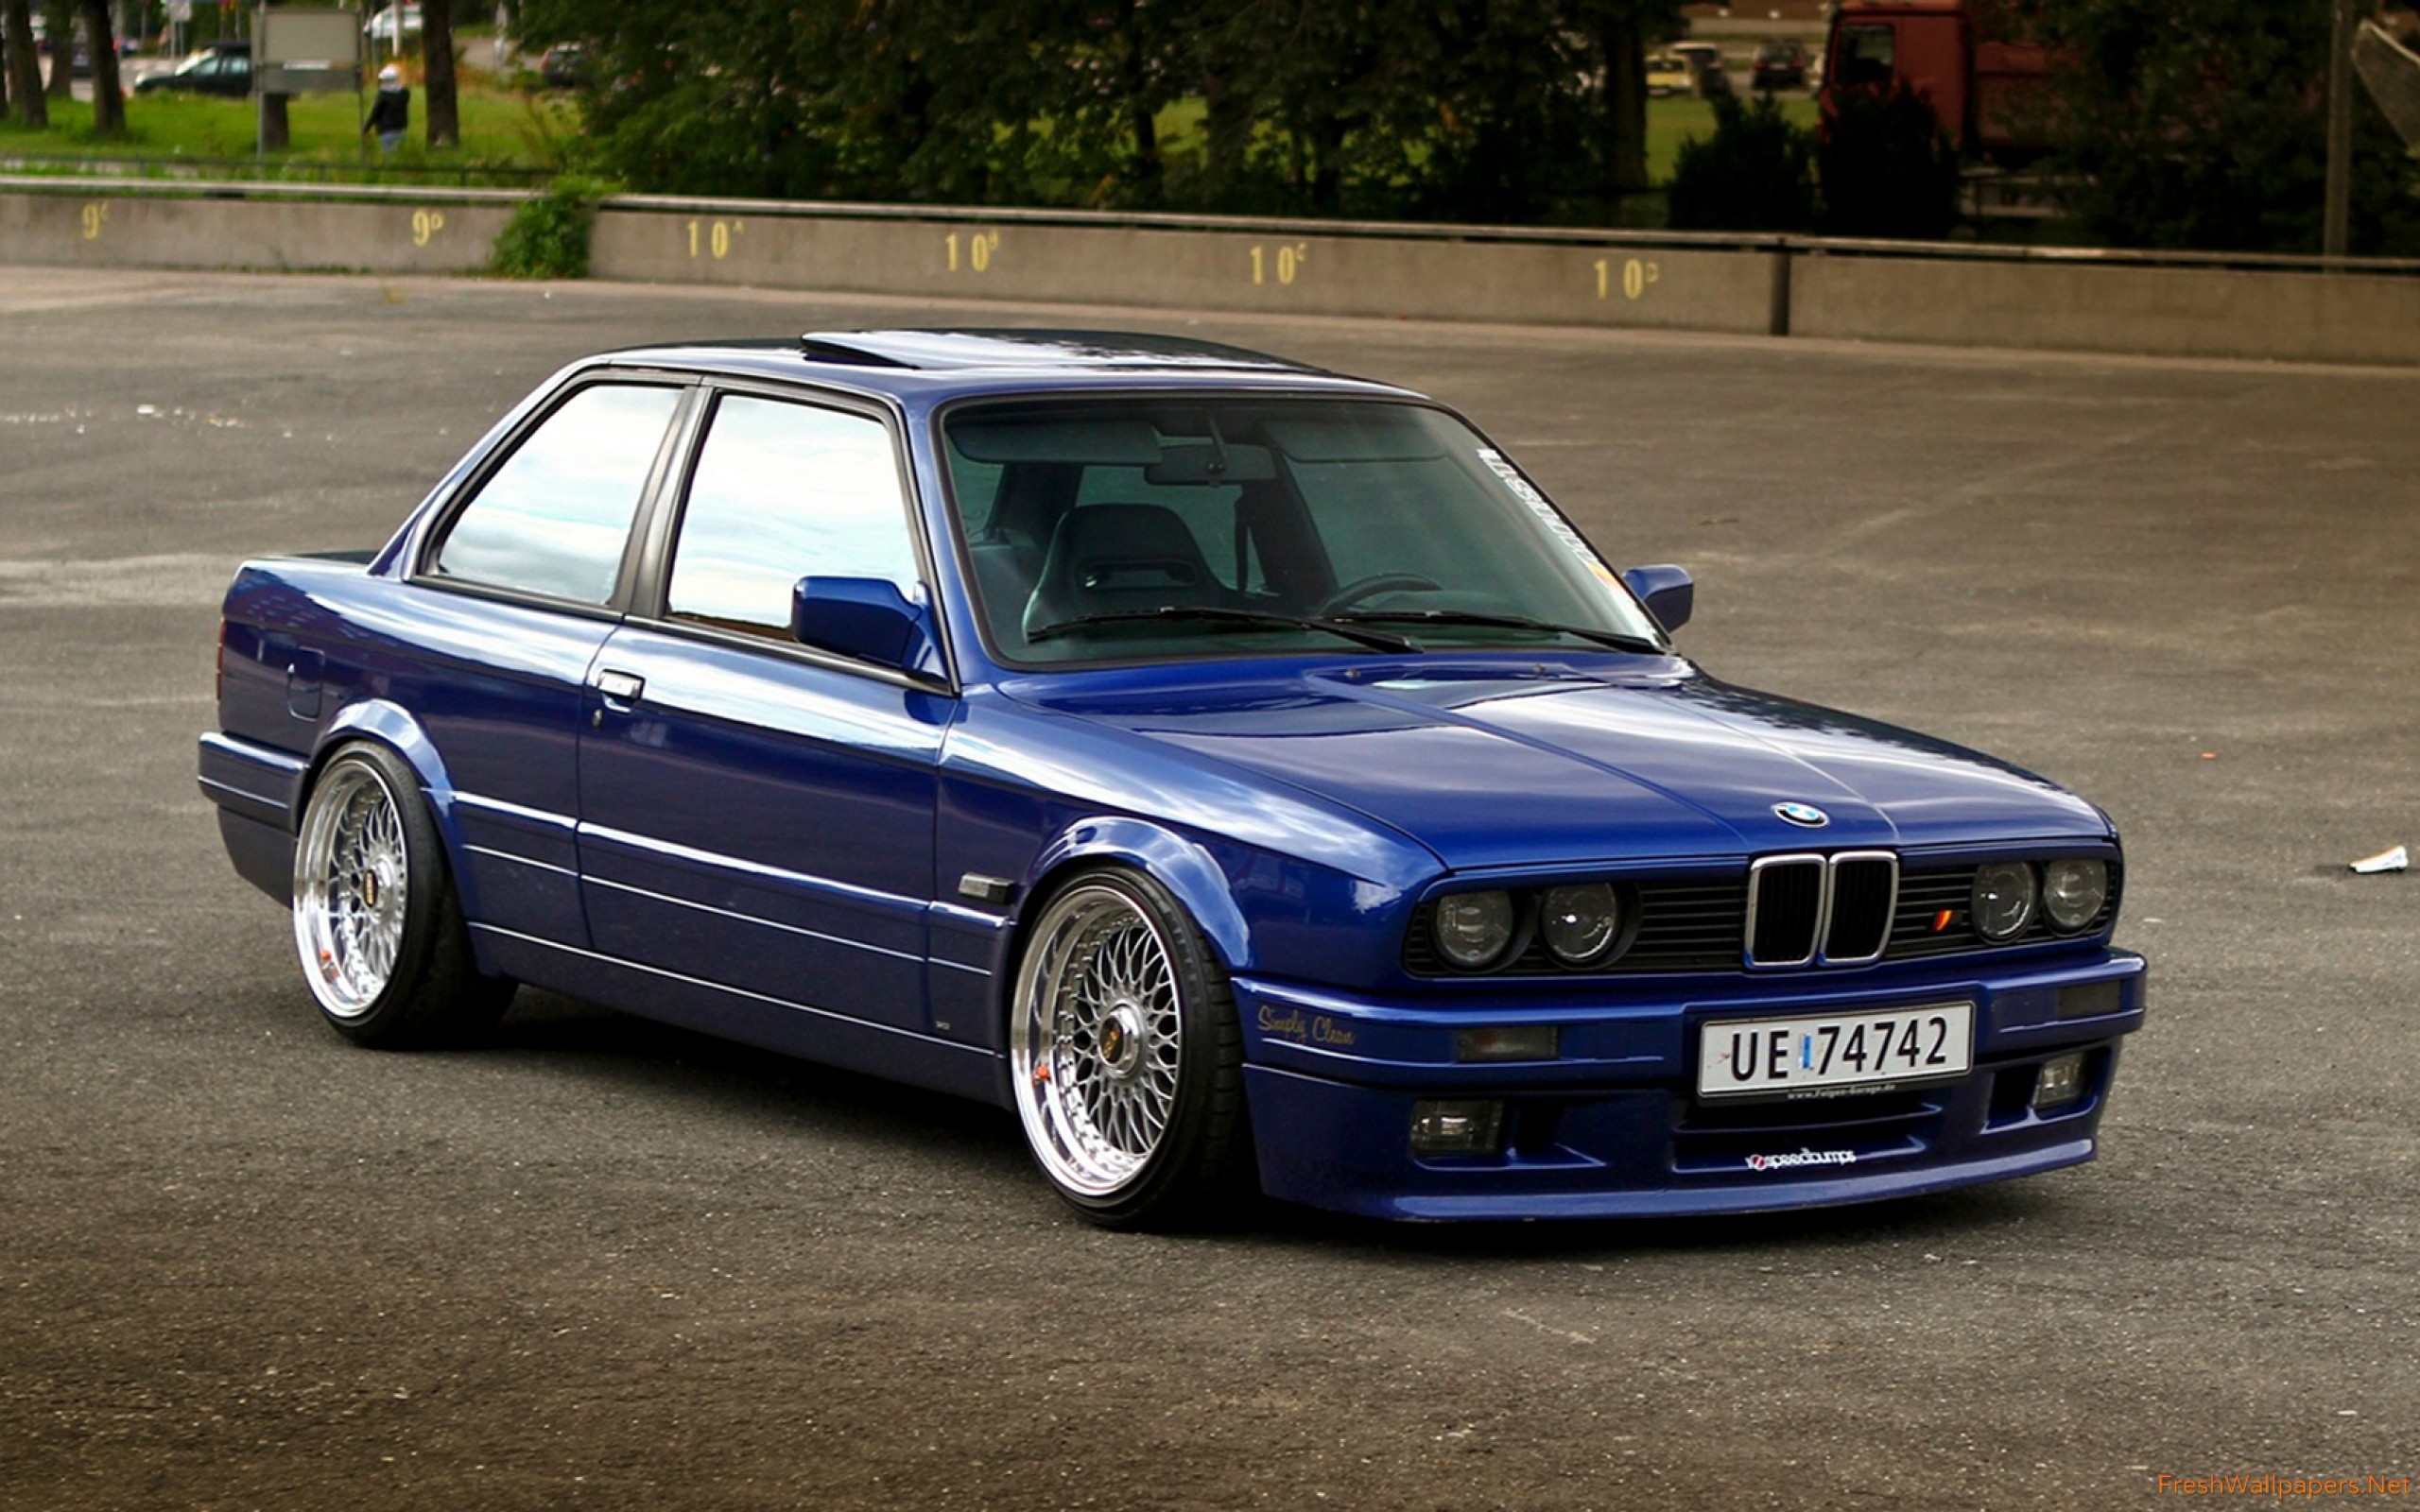 Old BMW Car Wallpapers for PC 1797 - HD Wallpaper Site